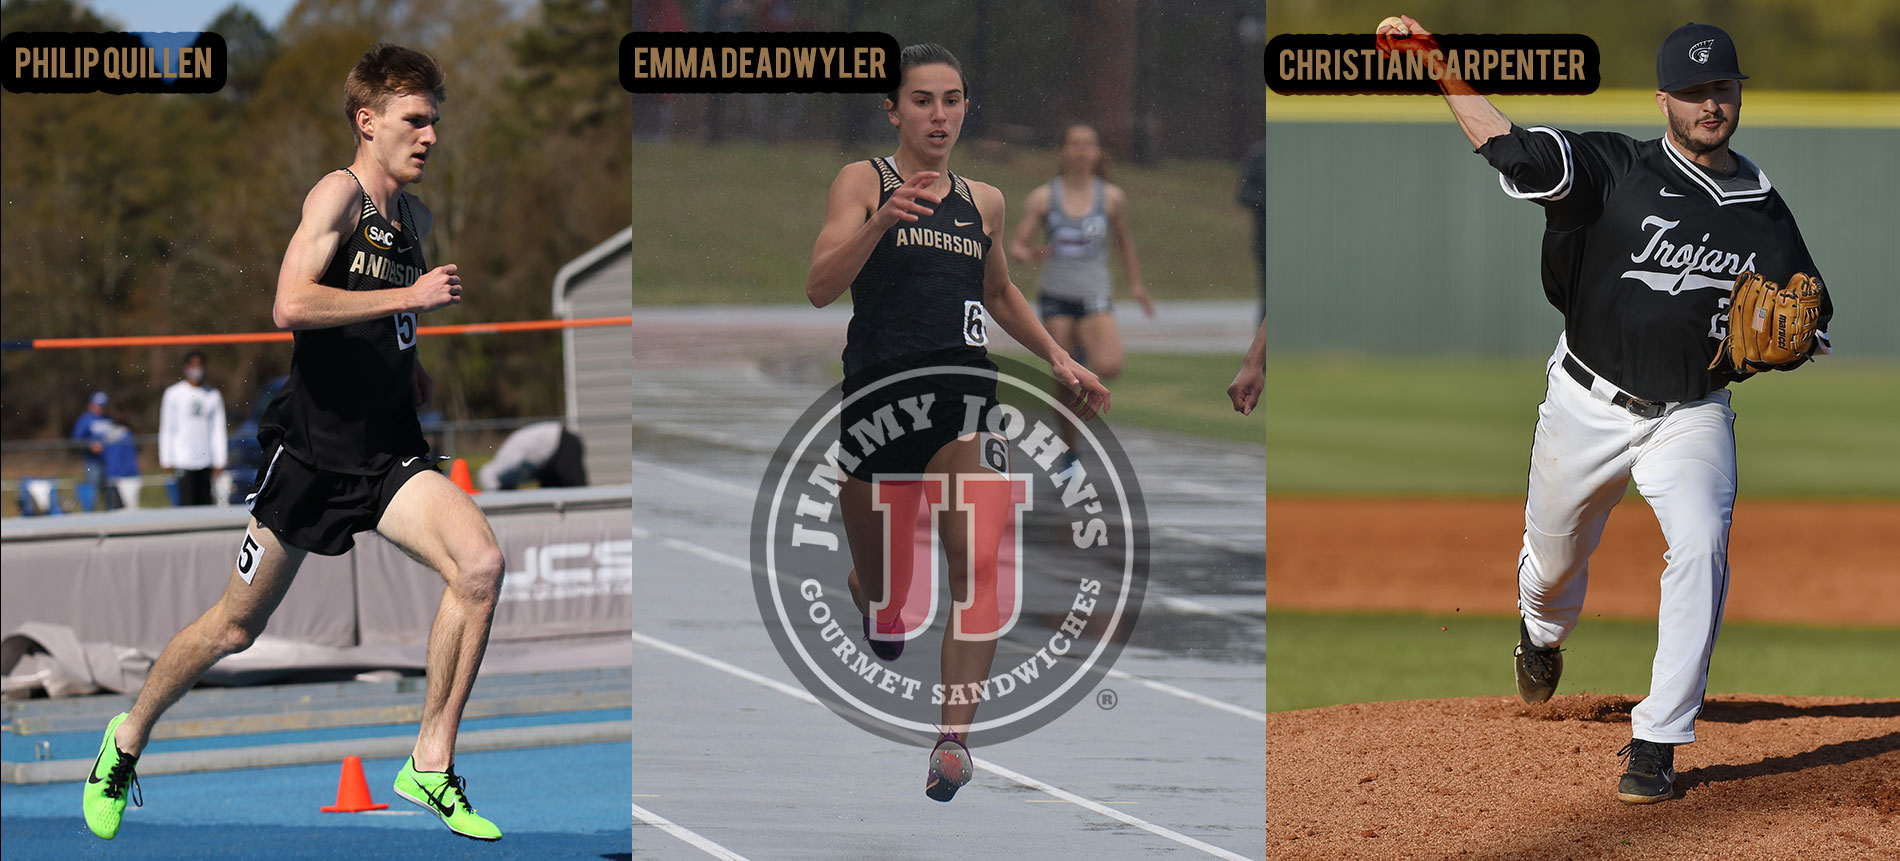 Emma Deadwyler, Philip Quillen and Christian Carpenter Named Jimmy John’s Female and Co-Male Athletes of the Week